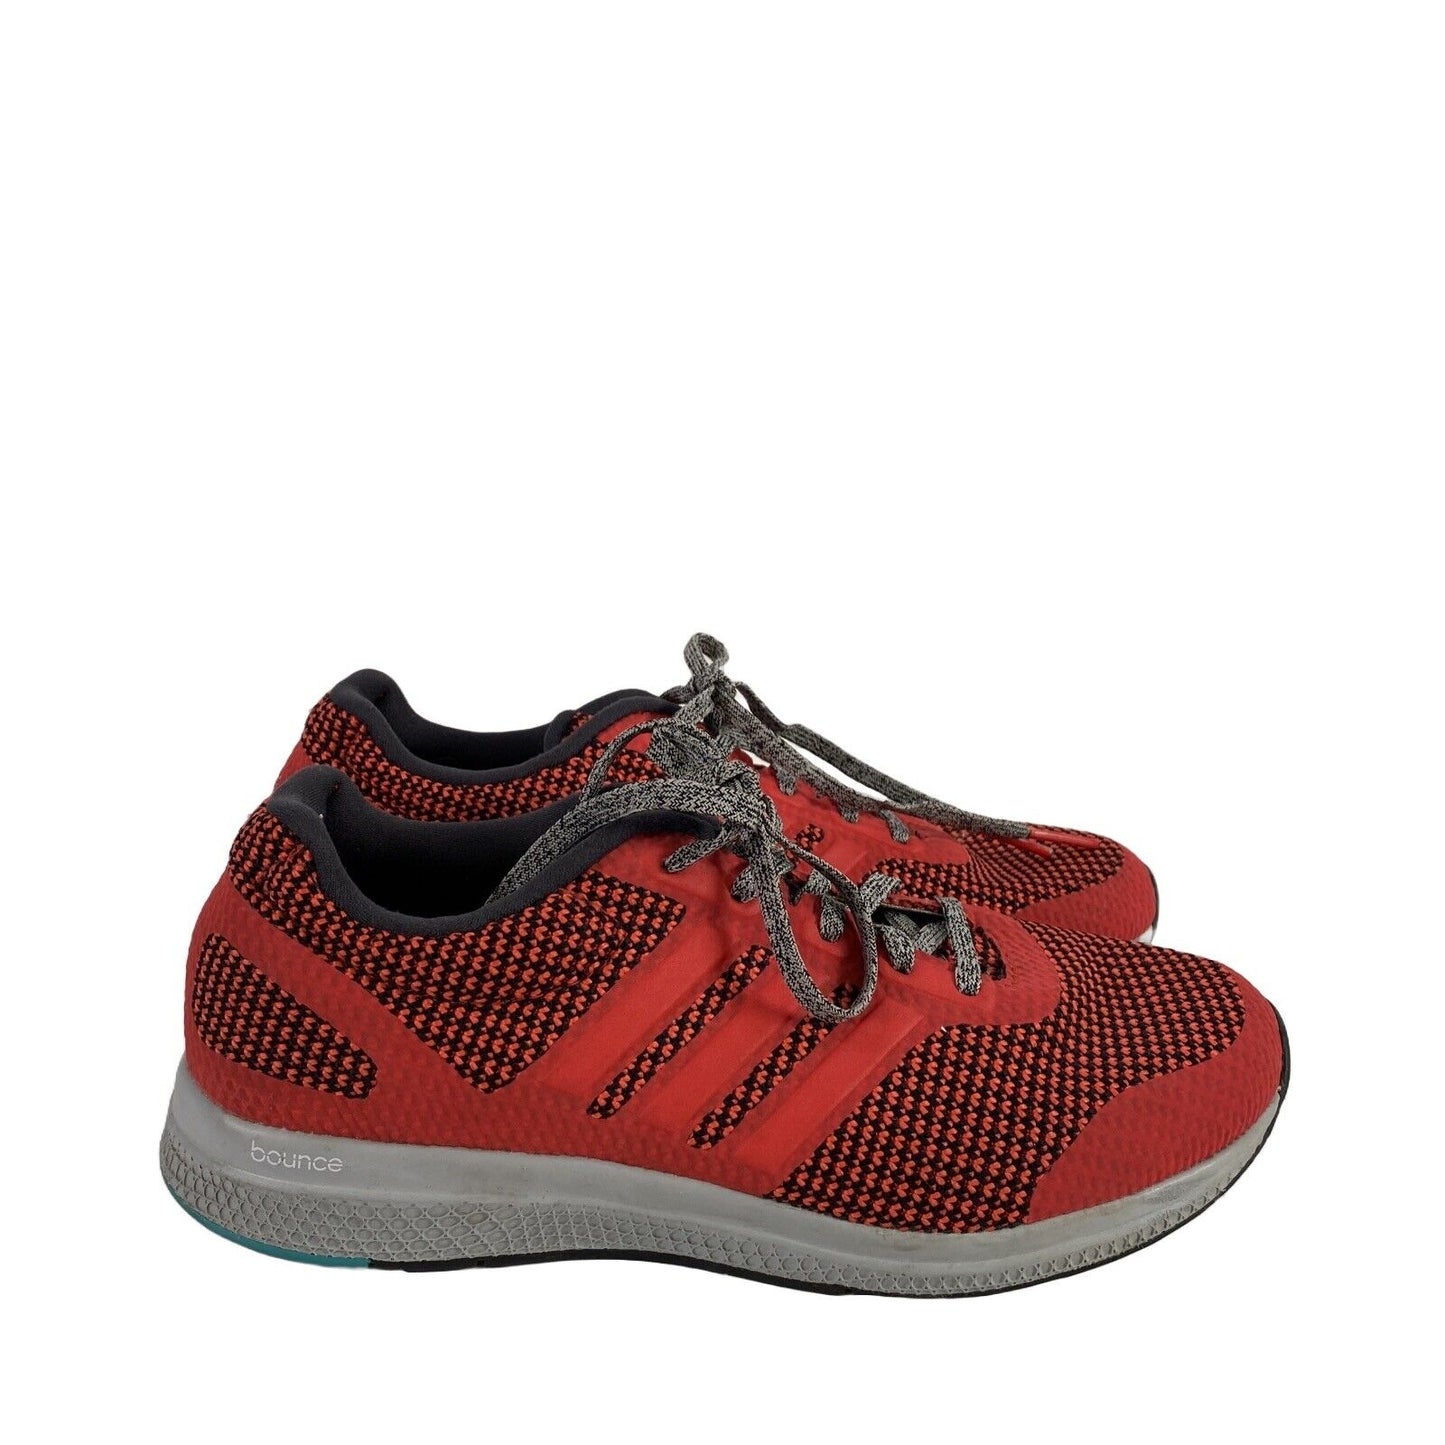 Adidas Men's Red/Black Mana Bounce Lace Up Running Sneakers - 7